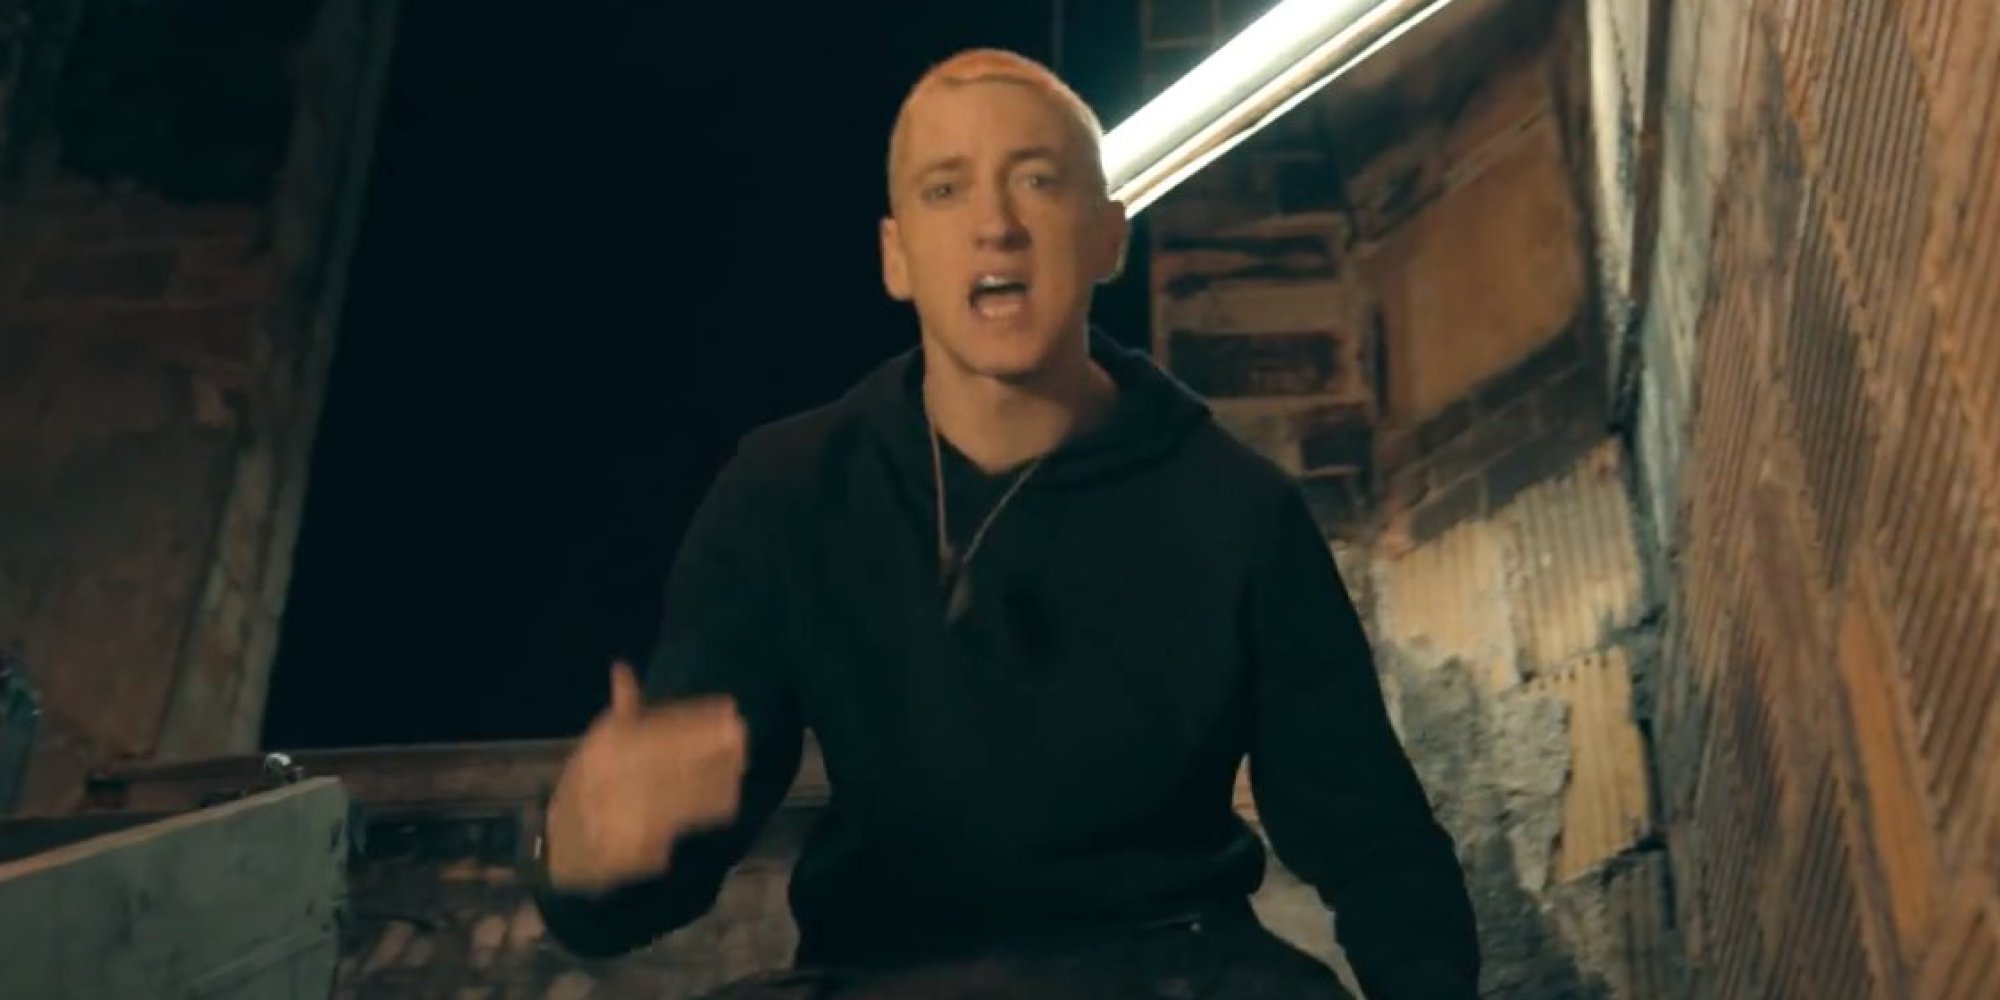 Eminems Survival Video Debuts In Support Of Call Of Duty Huffpost 